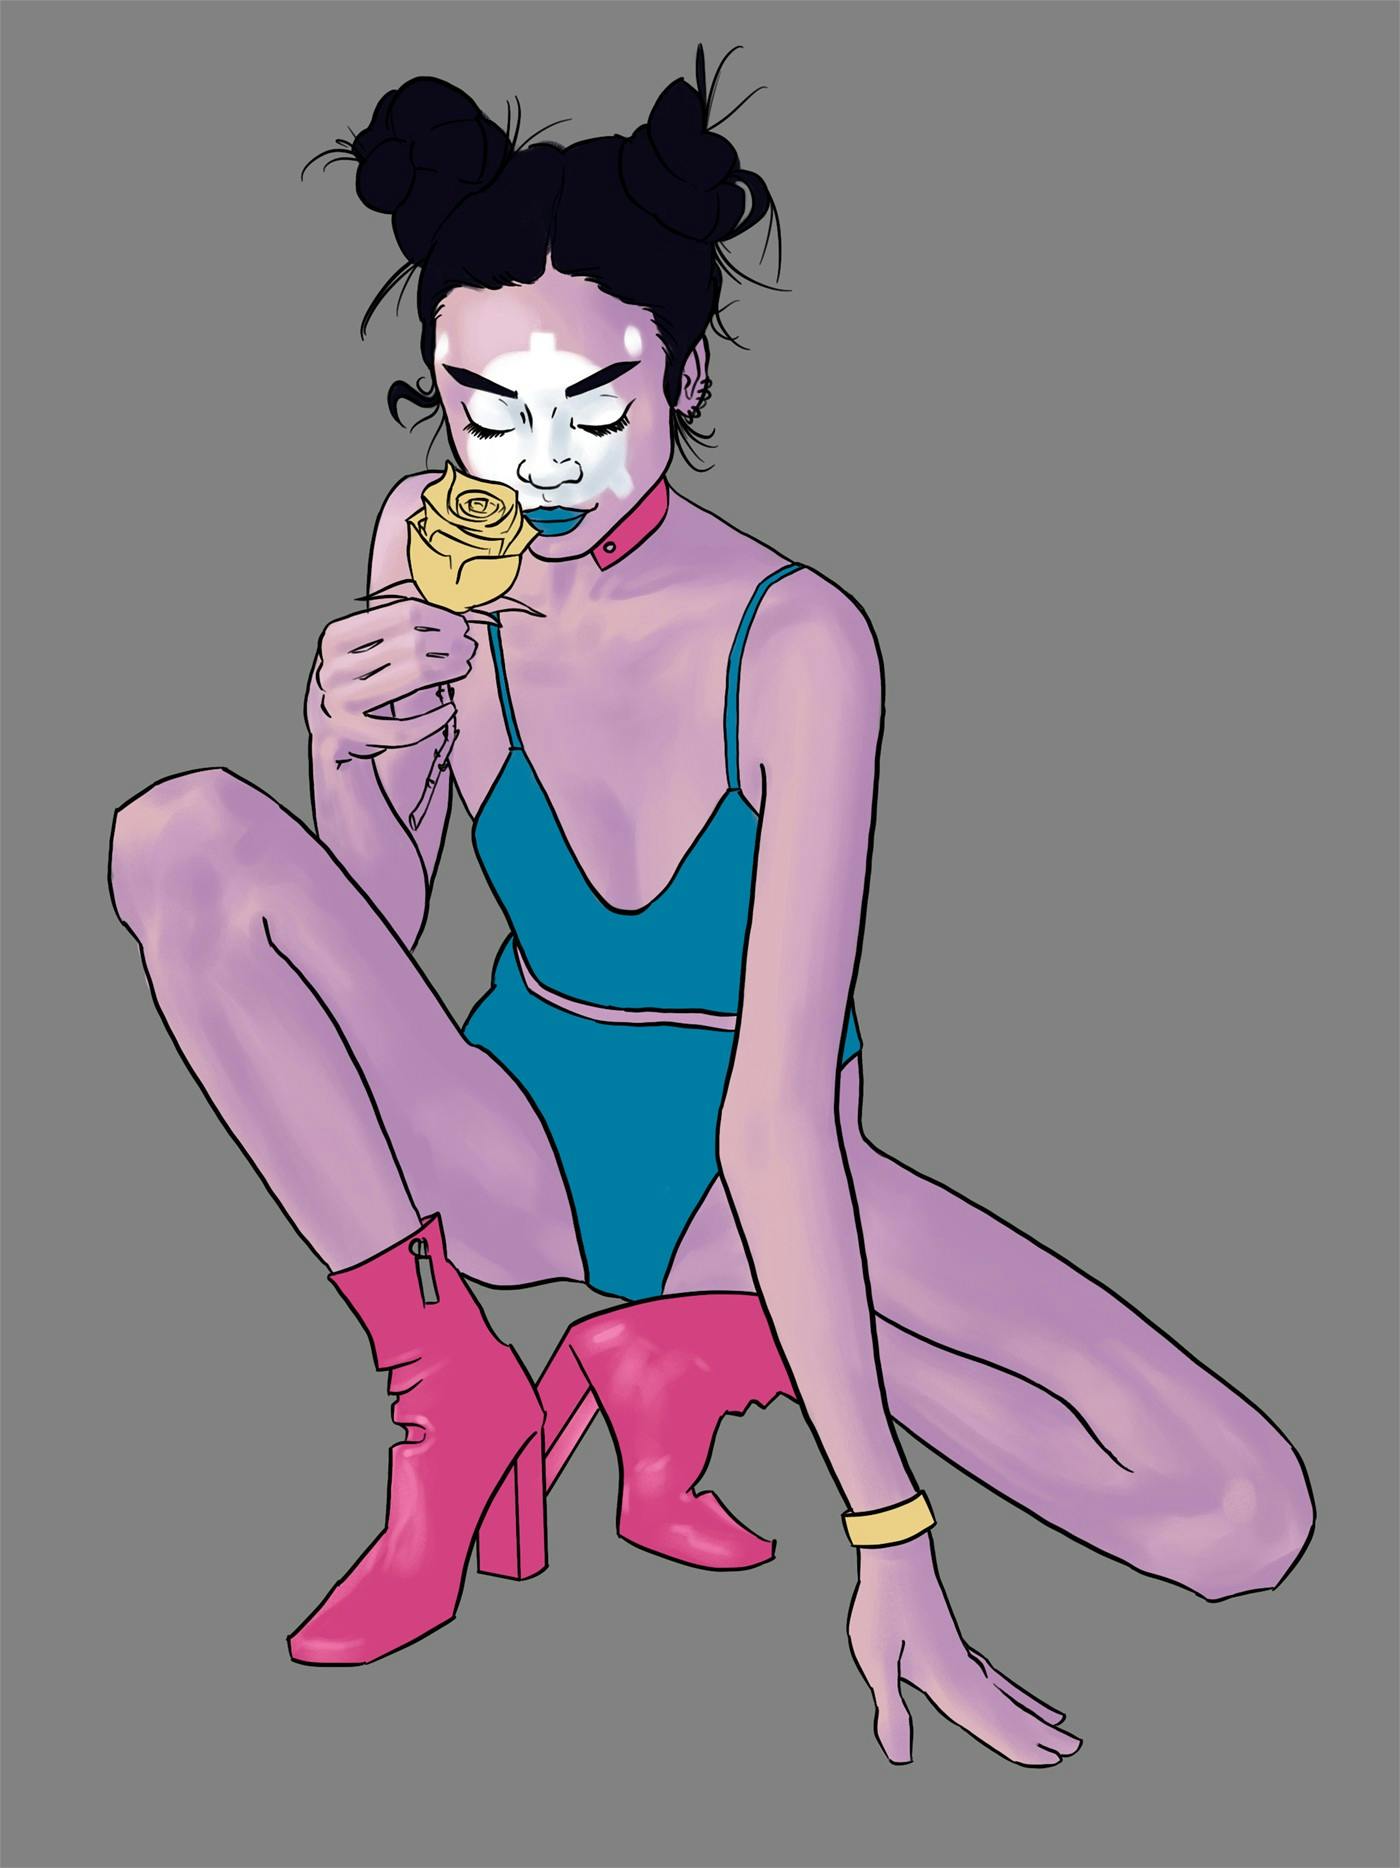 A digital illustration in comic book style of a woman crouching and smelling a flat-coloured yellow rose; she has a white symbol painted overtop the centre of her face, has mauve skin, and is wearing a blue top and bottoms with bright pink shin-height boots.